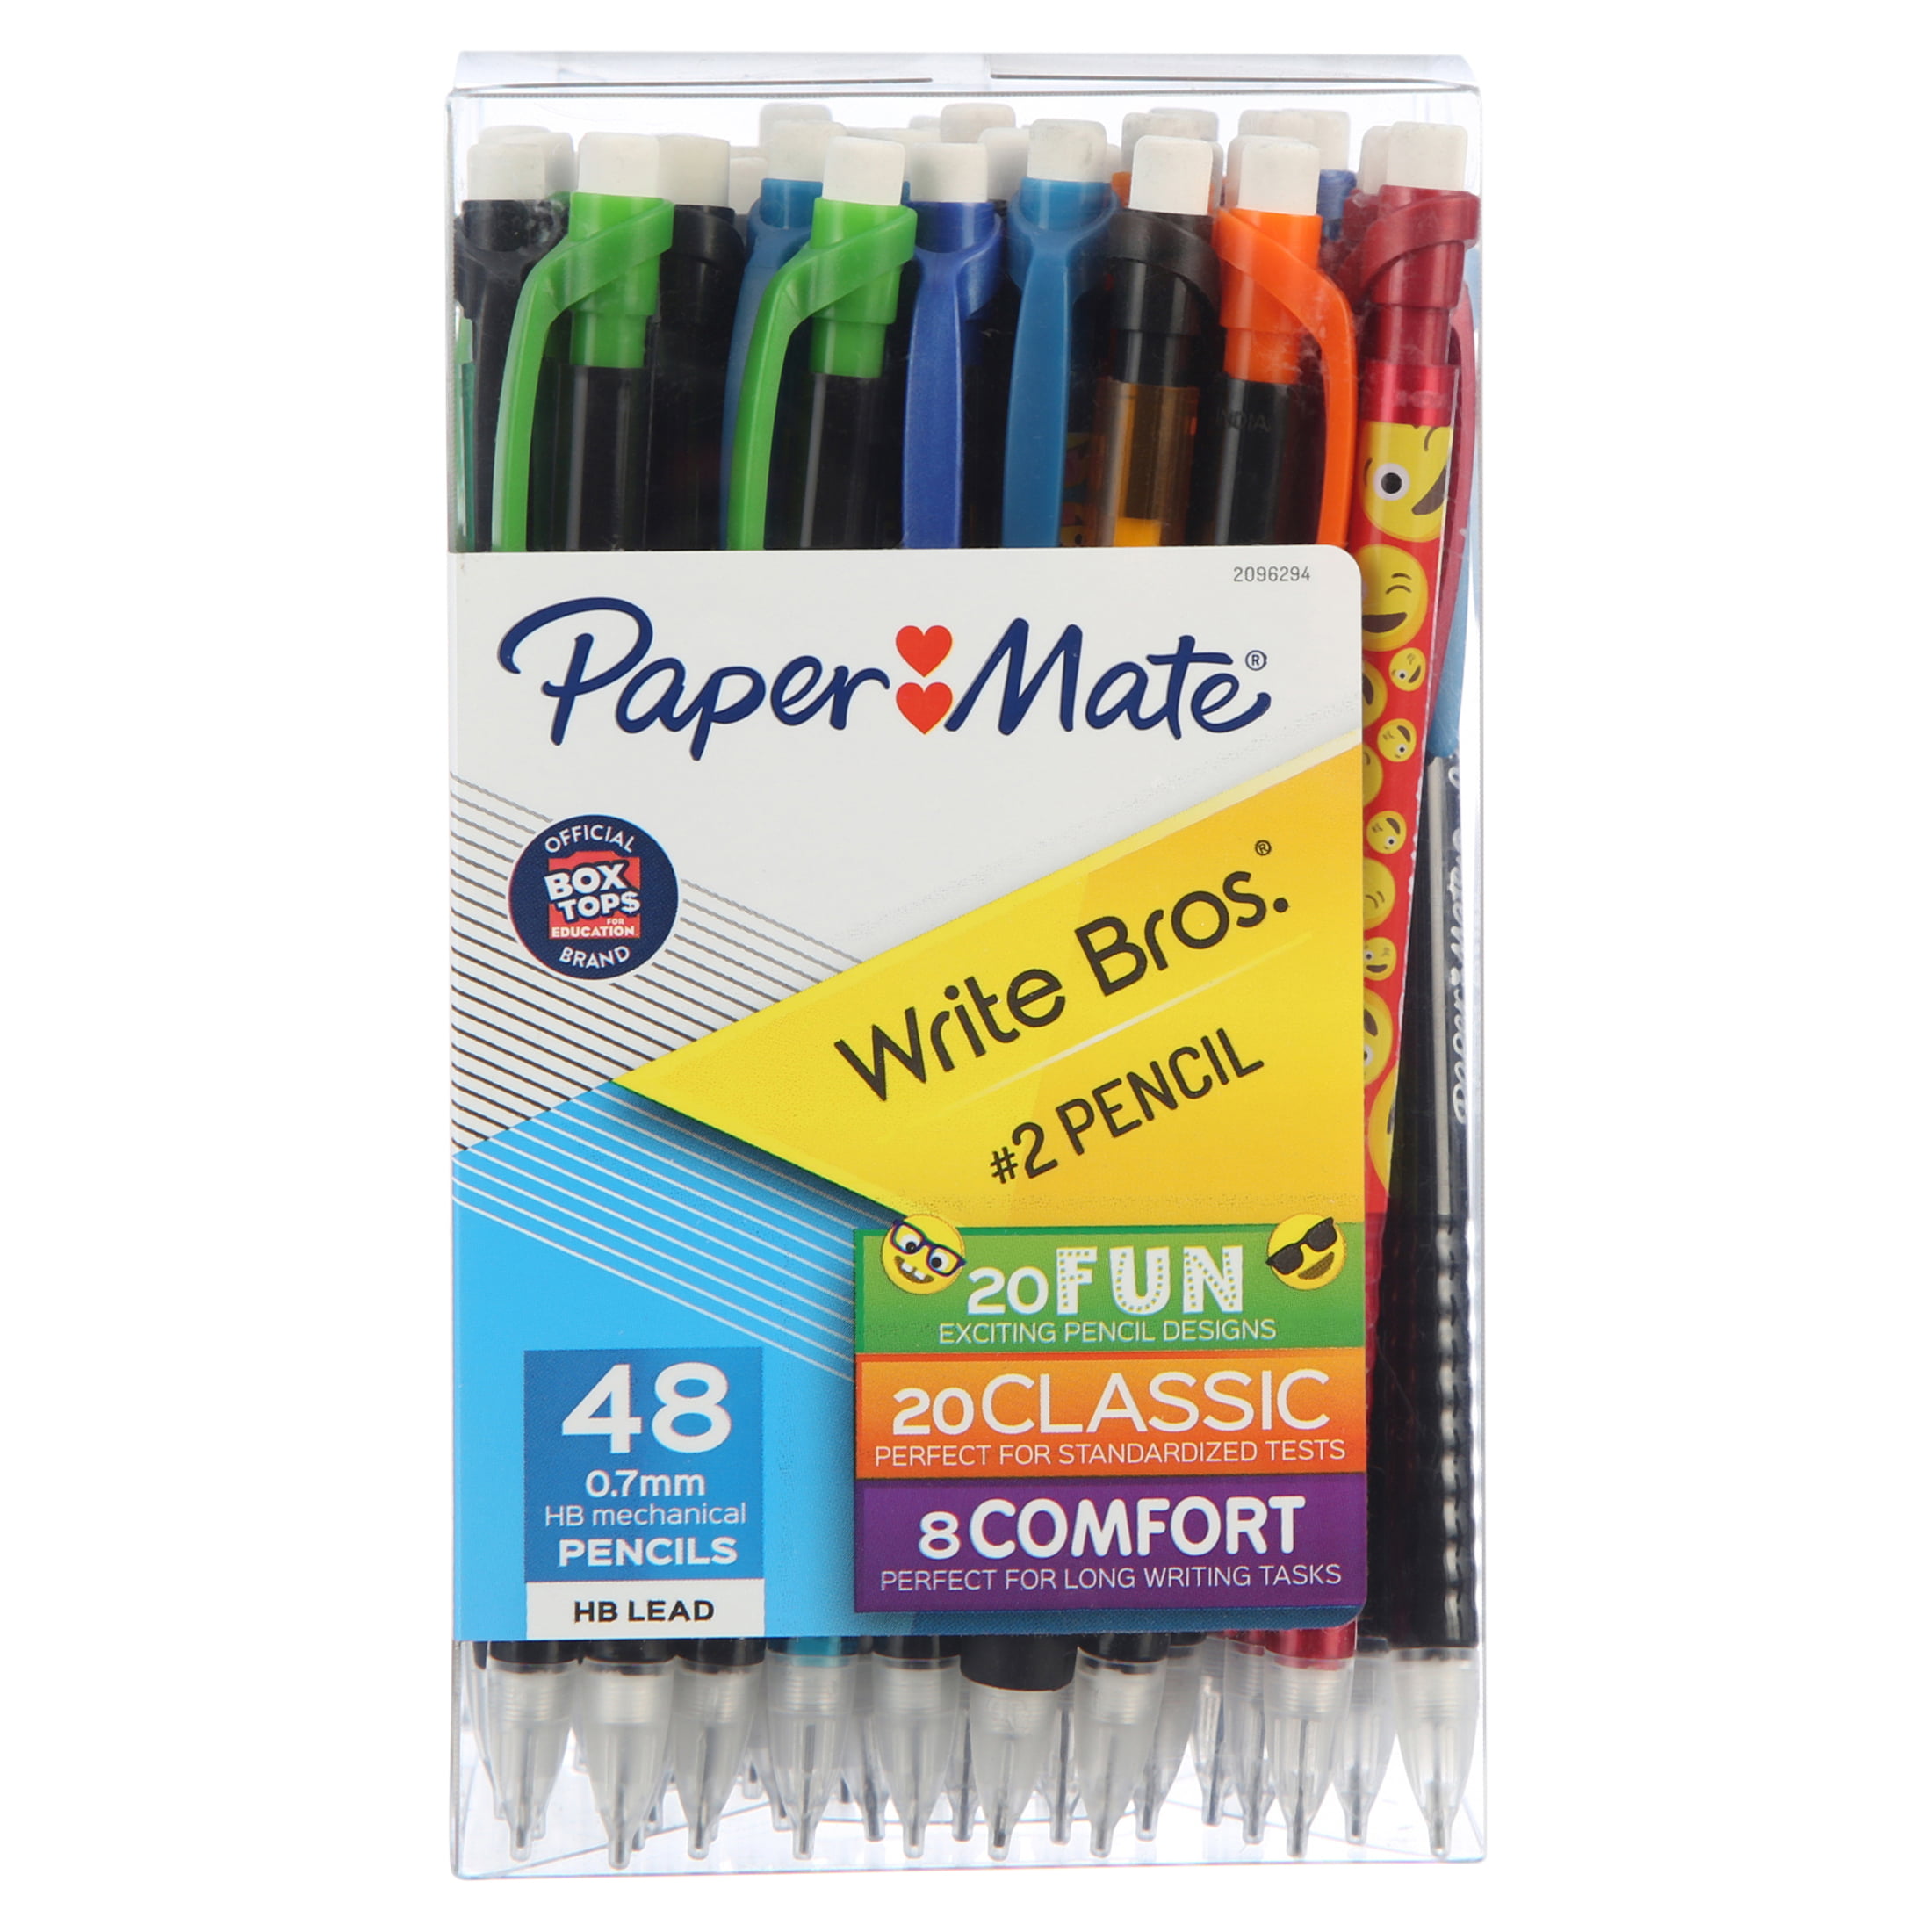 Paper Mate Write Bros Mechanical Graphite Pencils.7mm 48 Count HB #2 